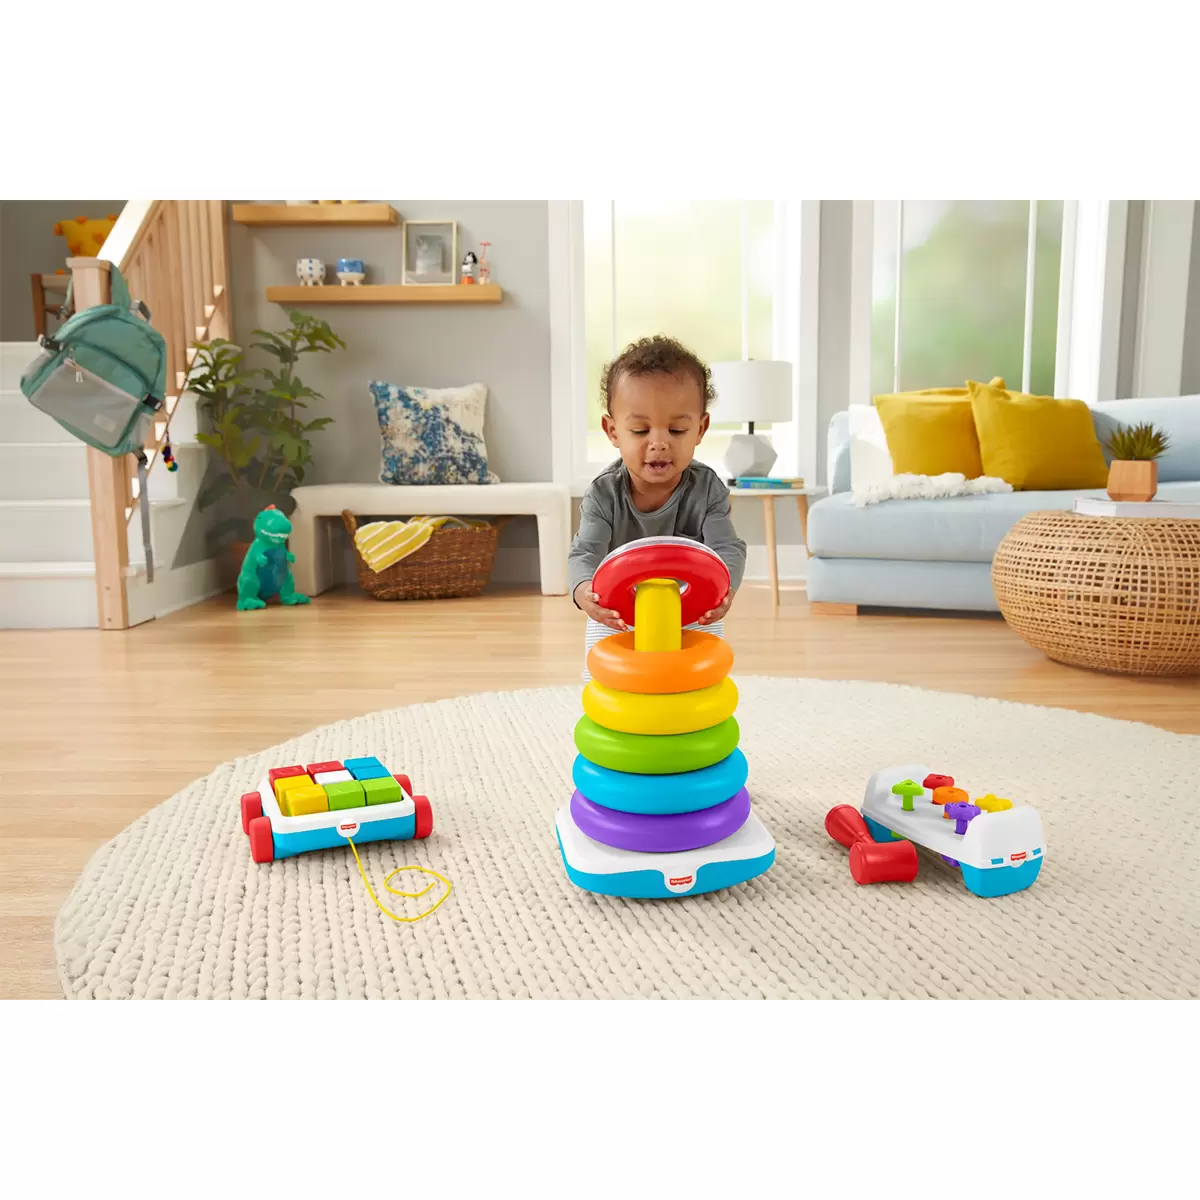 Buy Fisher Price Big Fun Toy Lifestyle5 Image at Costco.co.uk